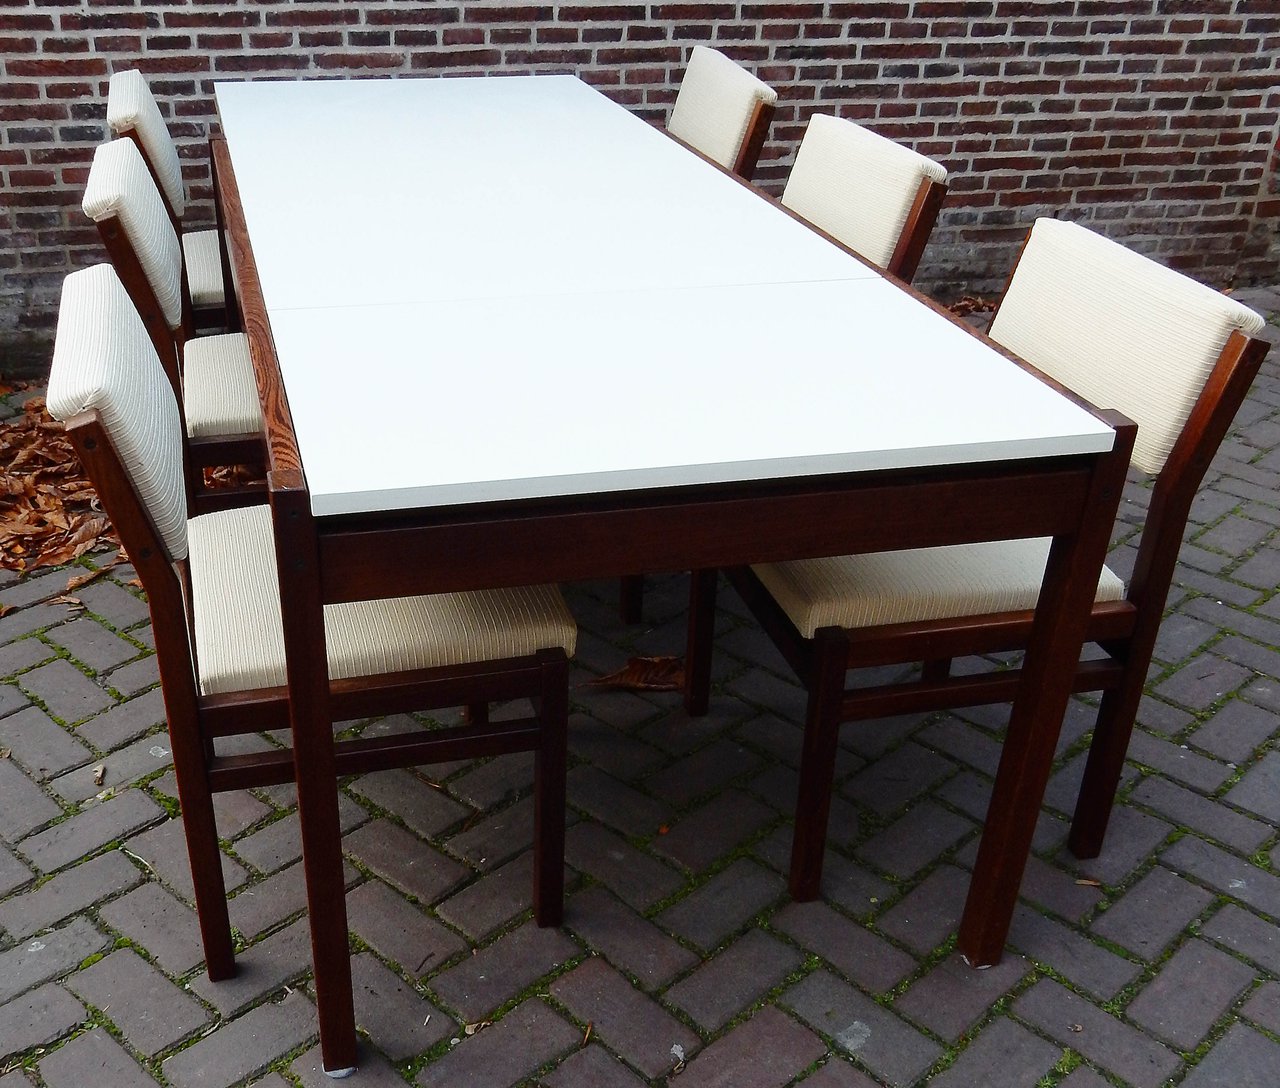 Pastoe dining table with 6 chairs, Cees Braakman.